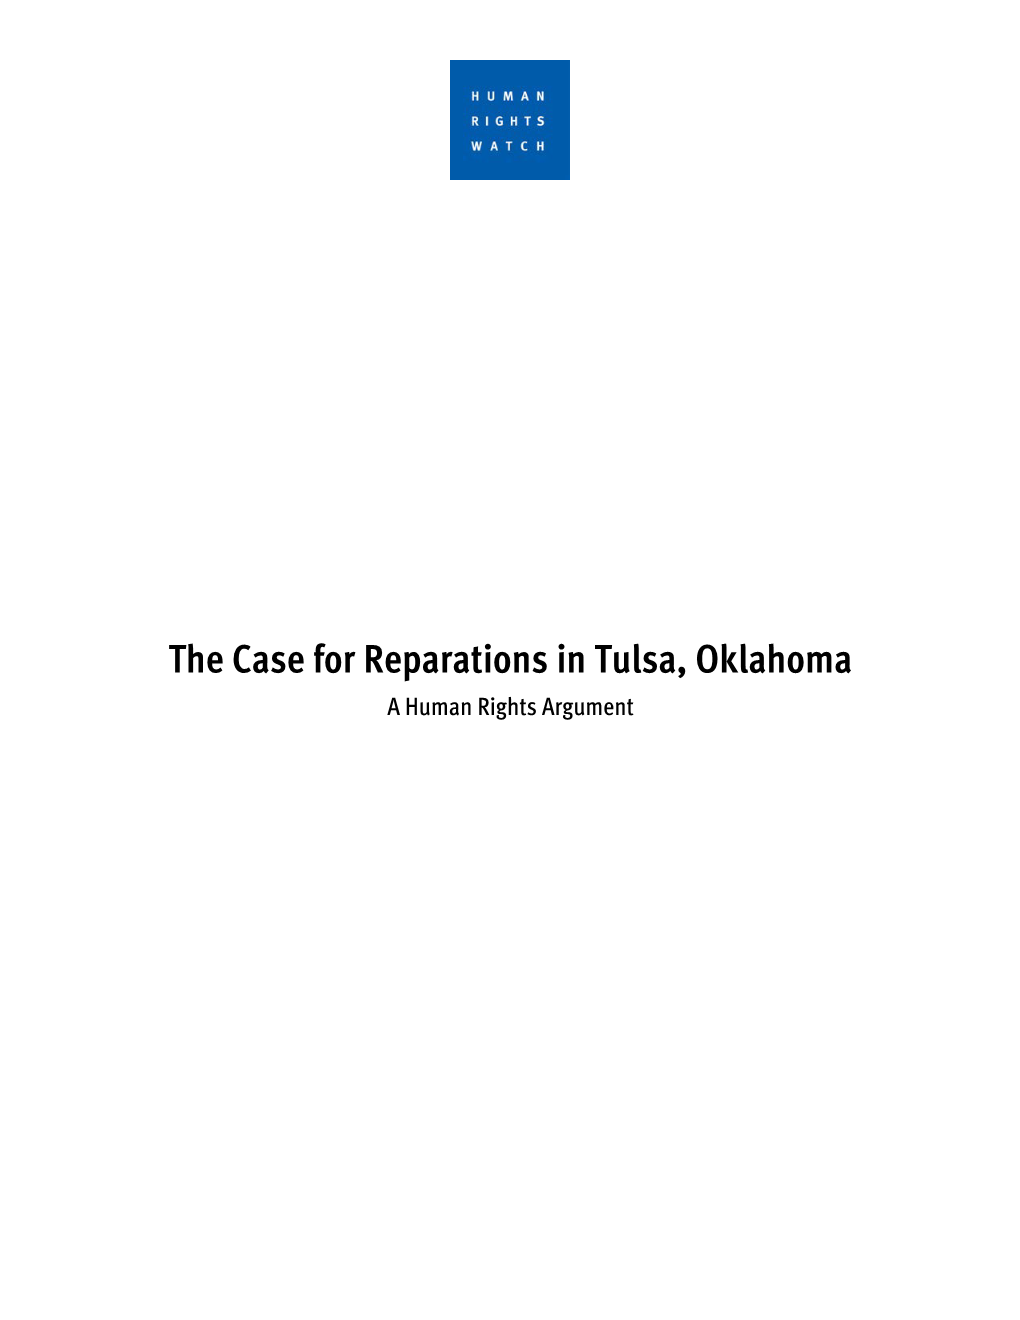 The Case for Reparations in Tulsa, Oklahoma a Human Rights Argument